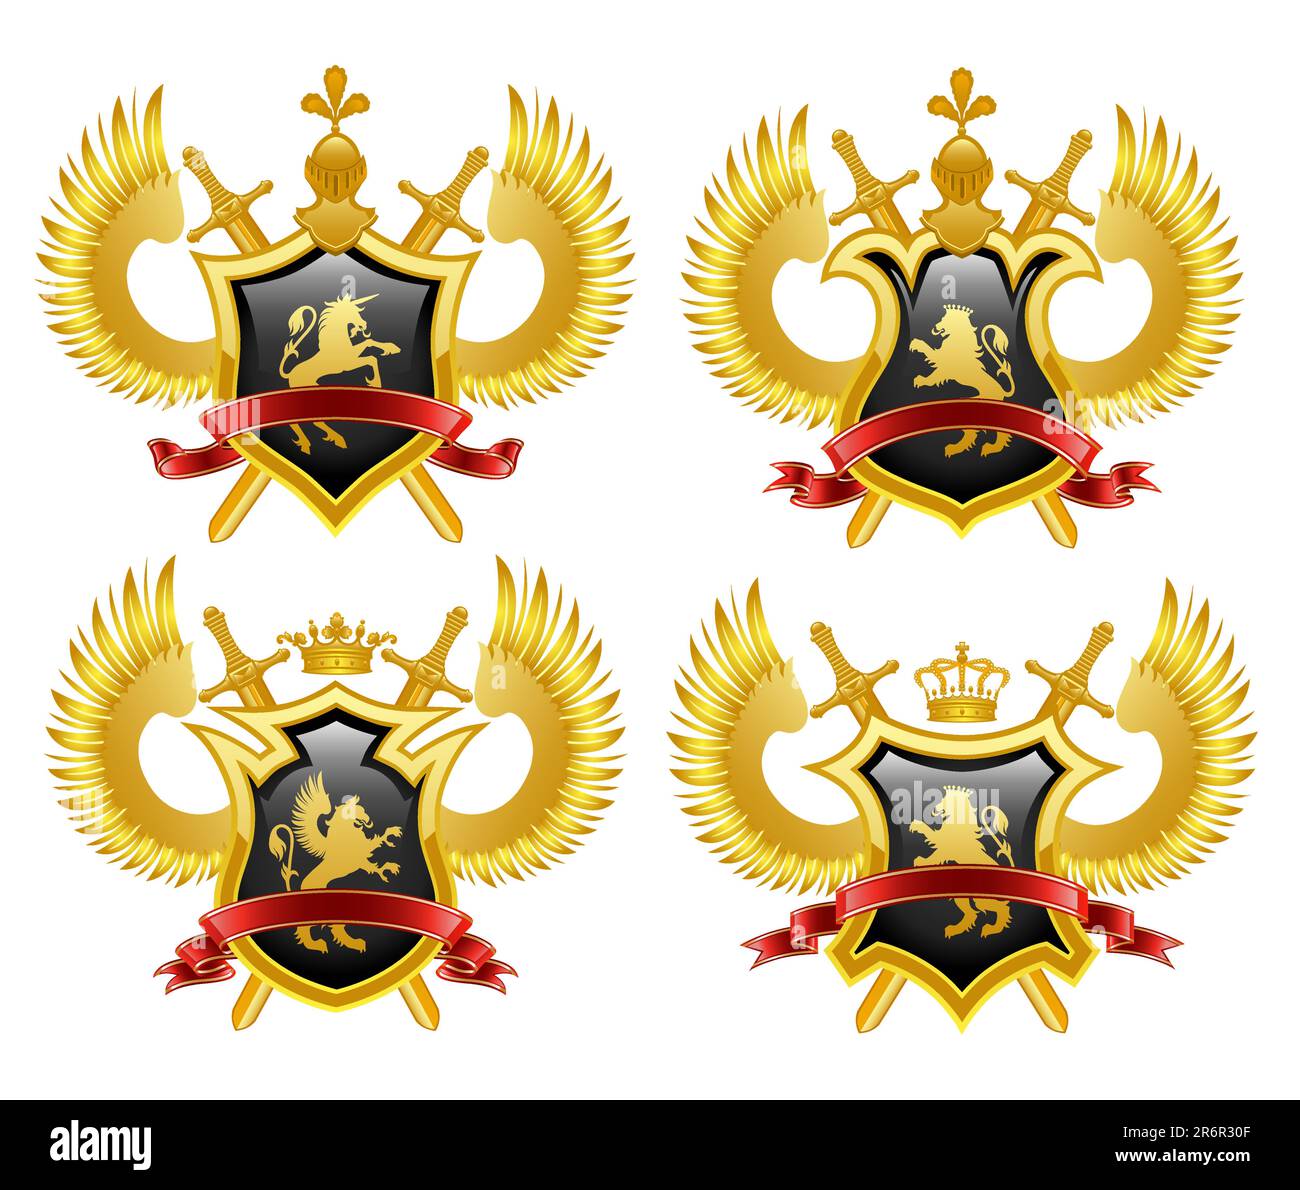 Coat of arms. Vector illustration. Stock Vector